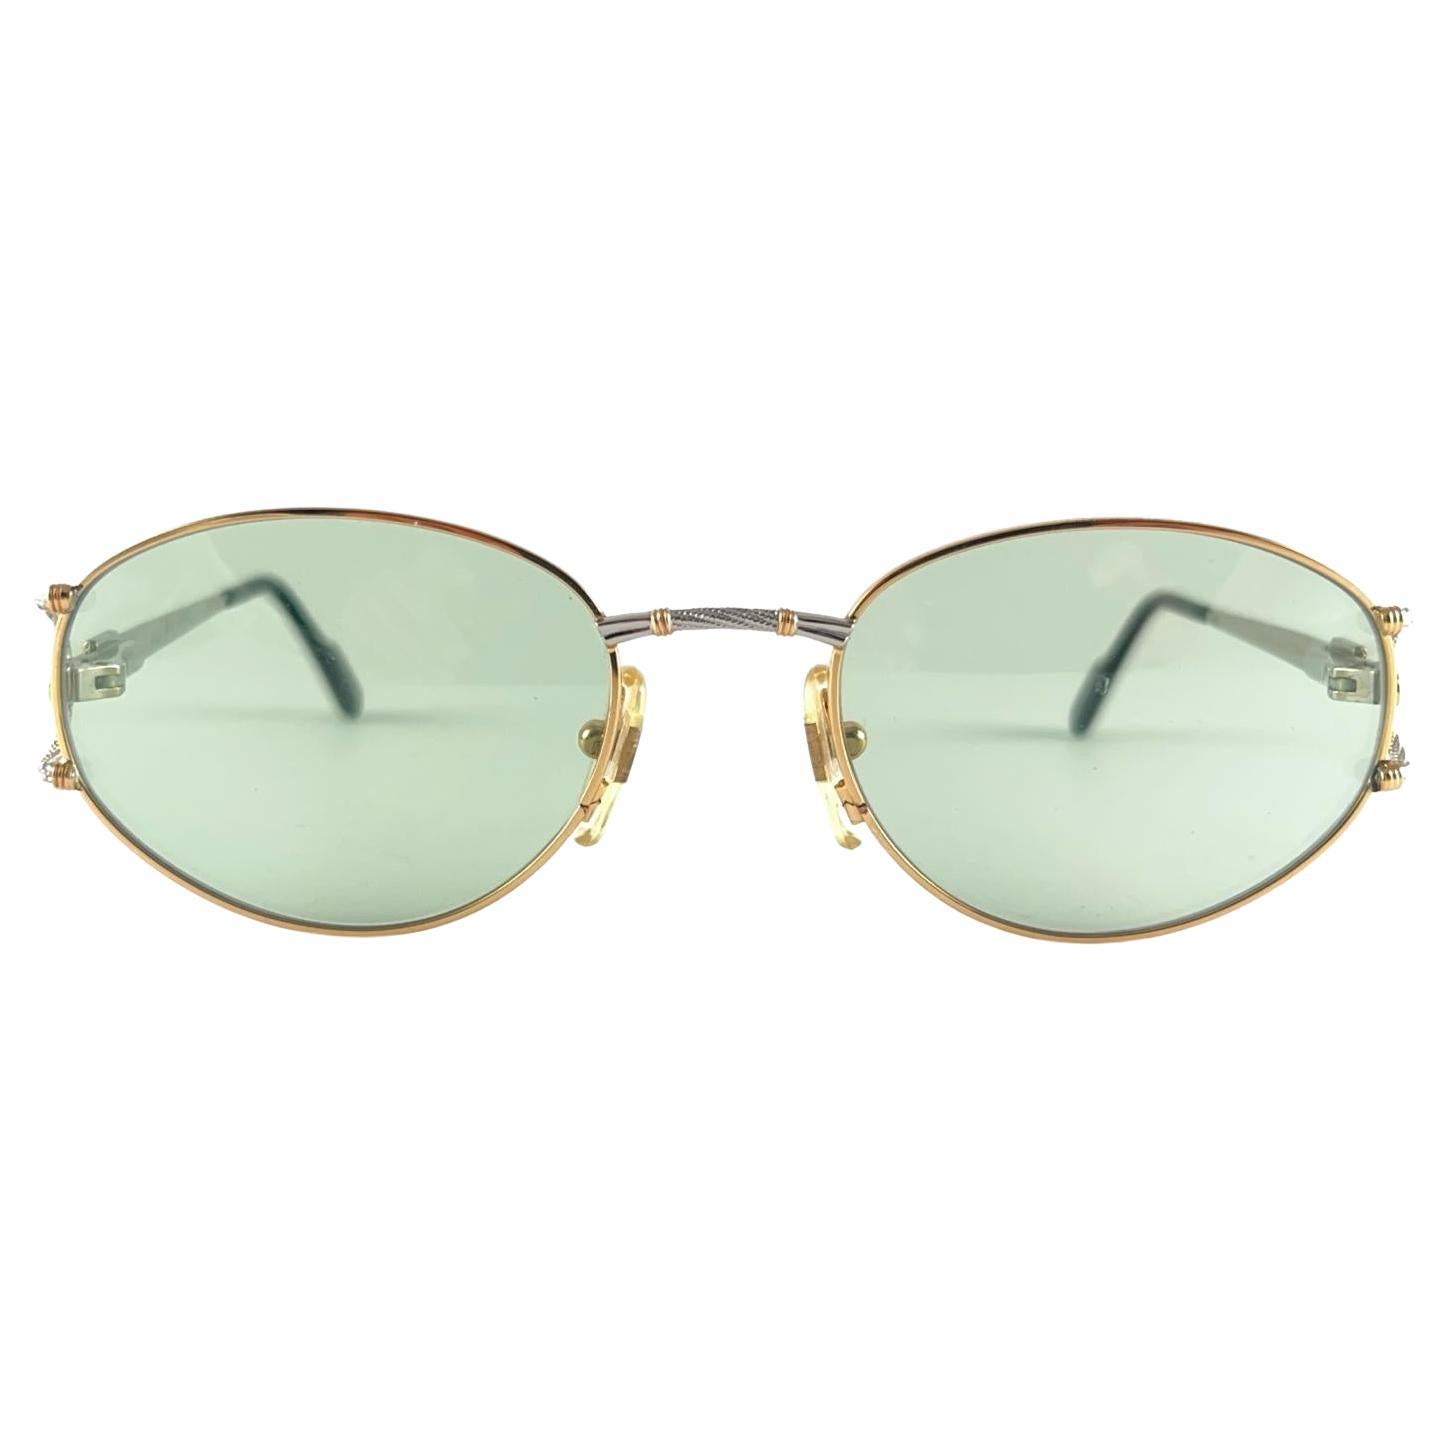 New Vintage Tiffany T 387 Oval Gold Plated Green Lenses 90'S Sunglasses Italy For Sale